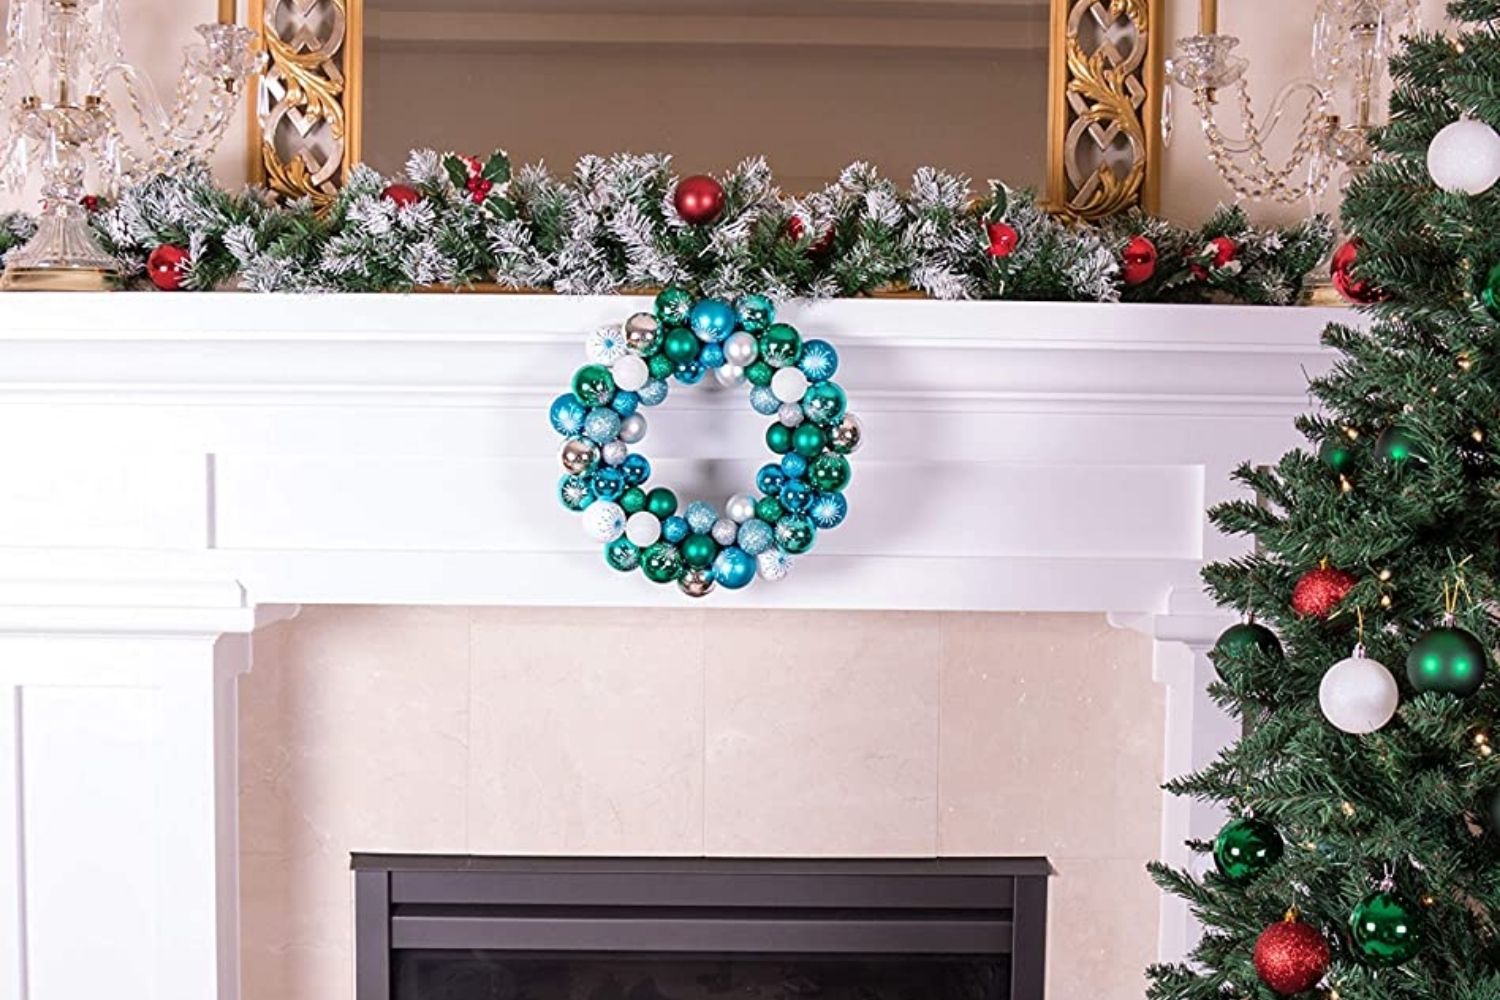 The Best Christmas Wreaths Option: Clever Creations 13 Inch Artificial Christmas Wreath